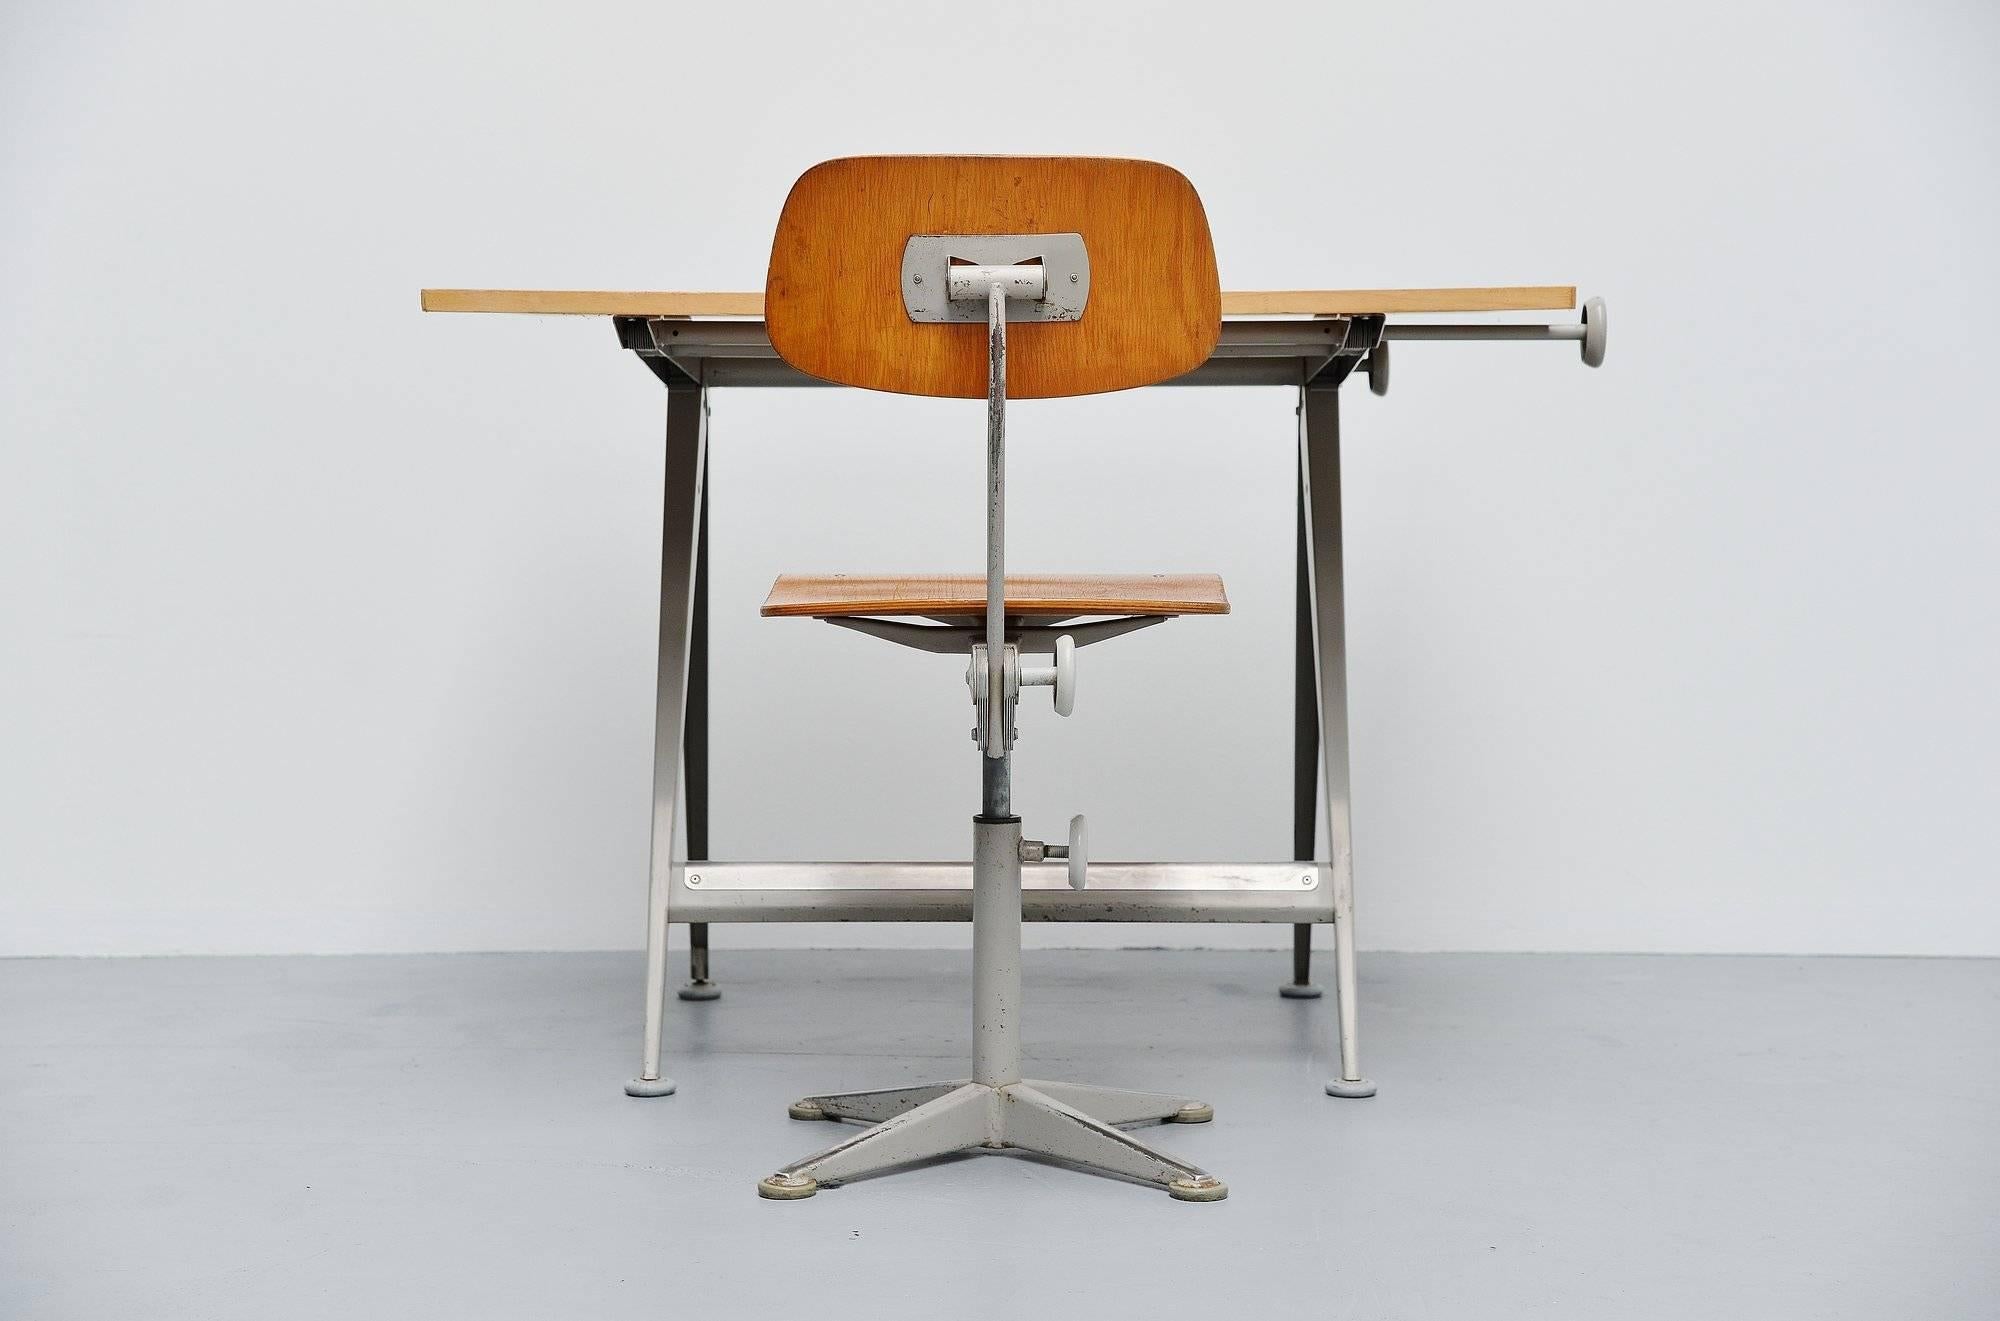 Cold-Painted Wim Rietveld Friso Kramer Reply Drafting Table, Holland, 1963